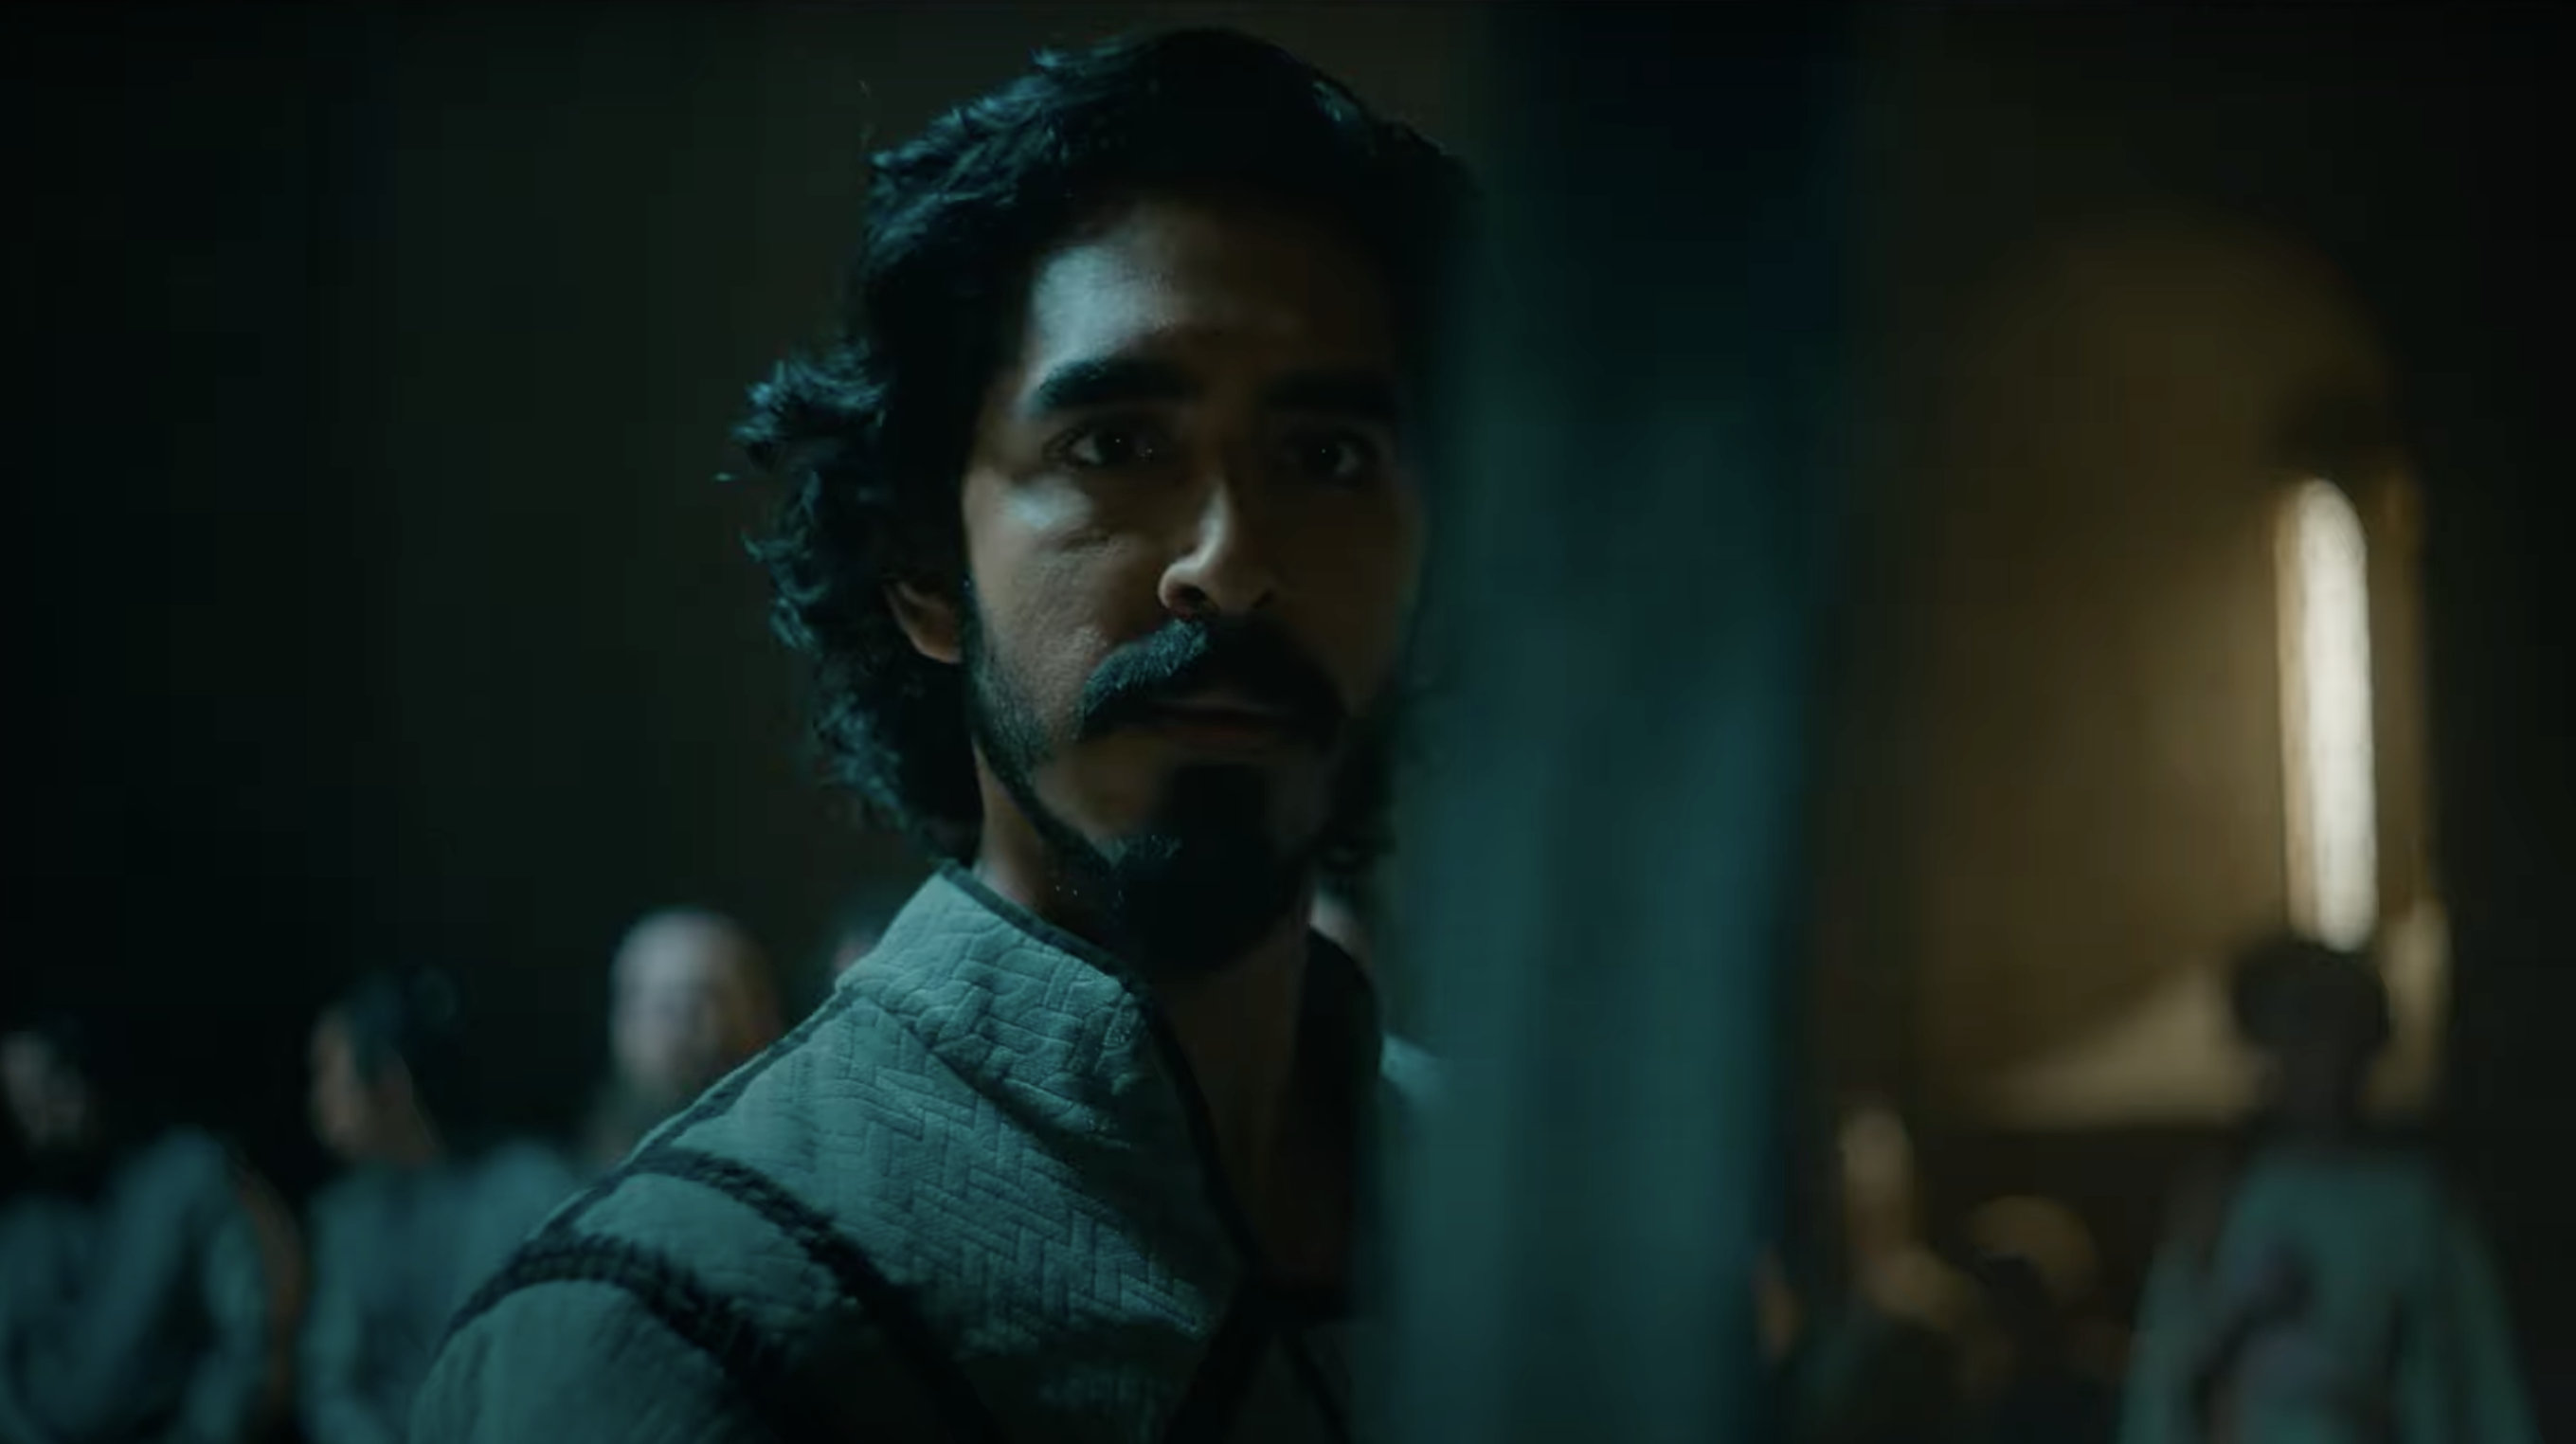 Dev Patel was “absolutely enthralled” by the script for The Green Knight